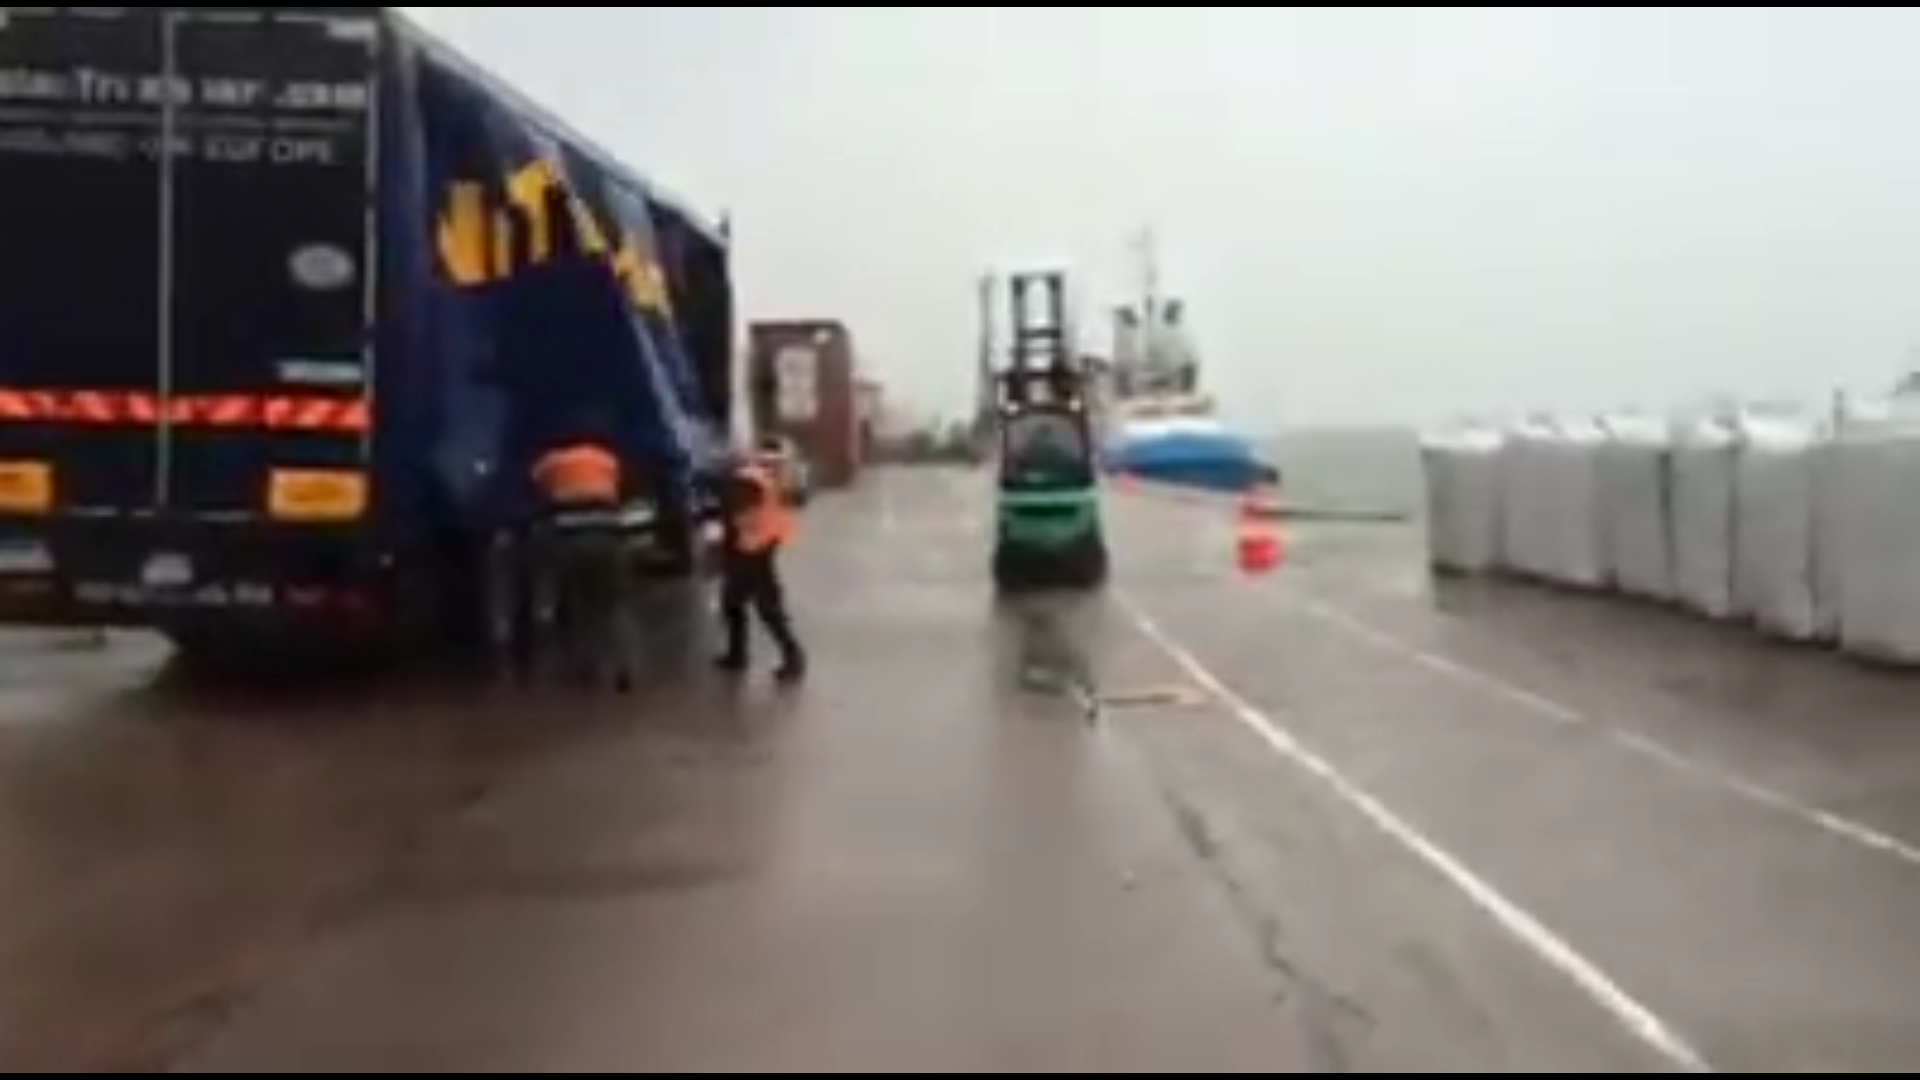 Artic trucks being loaded with 1 ton bags 